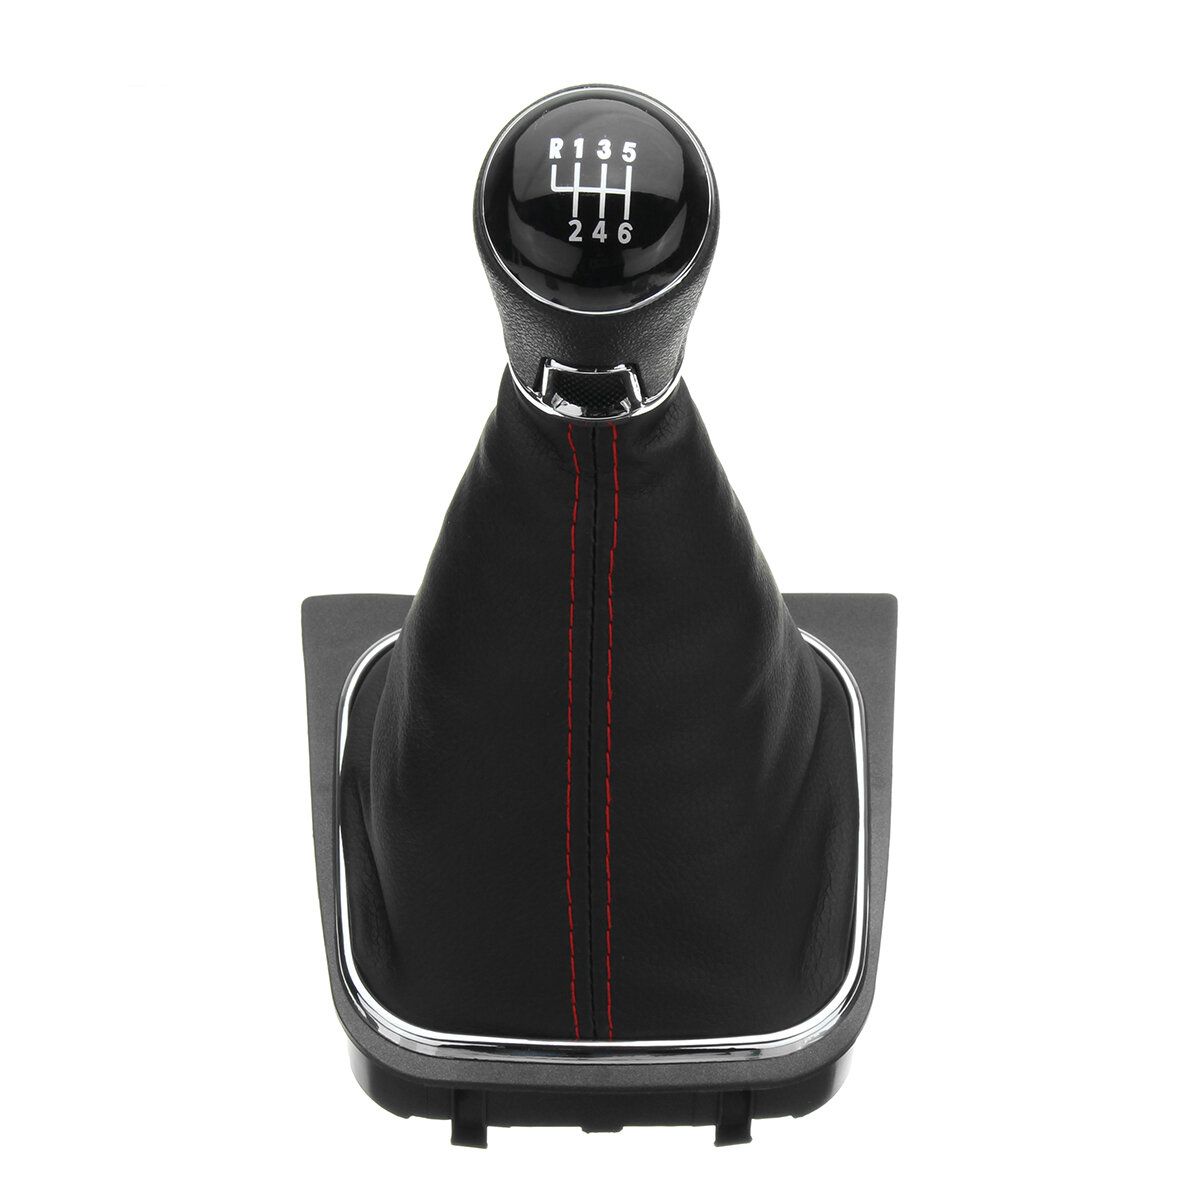 6 Speed Gear Shift Knob Shifter 11mm Inner PU Leather Boot Gaitor Cover For VW Golf 5 6